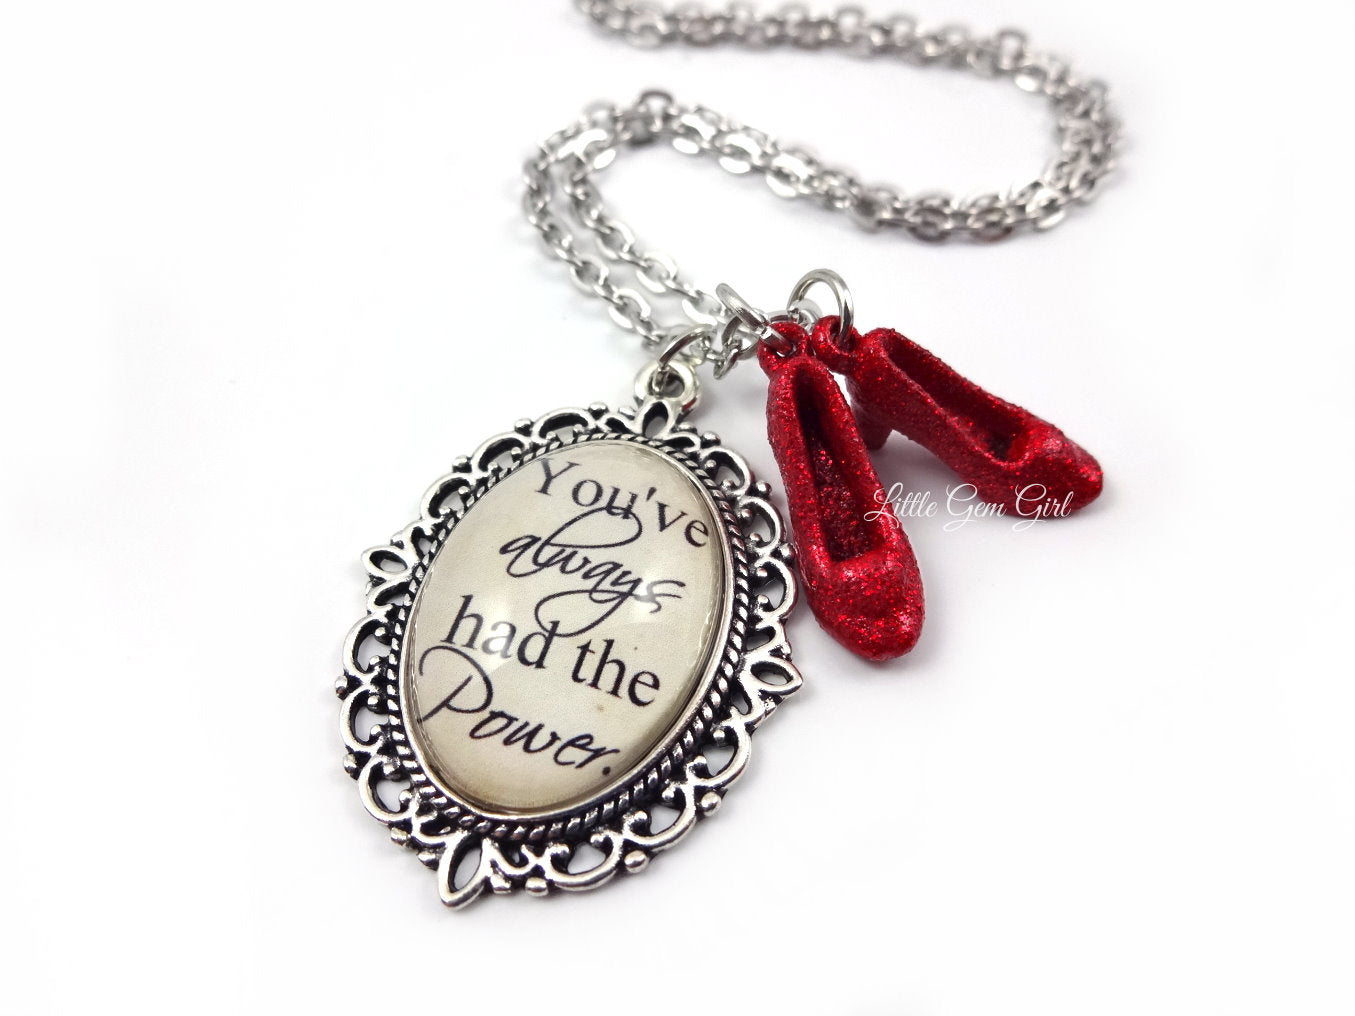 The Wonderful Wizard of Oz Necklace Pendant- You've always had the Power with Ruby Red Shoes